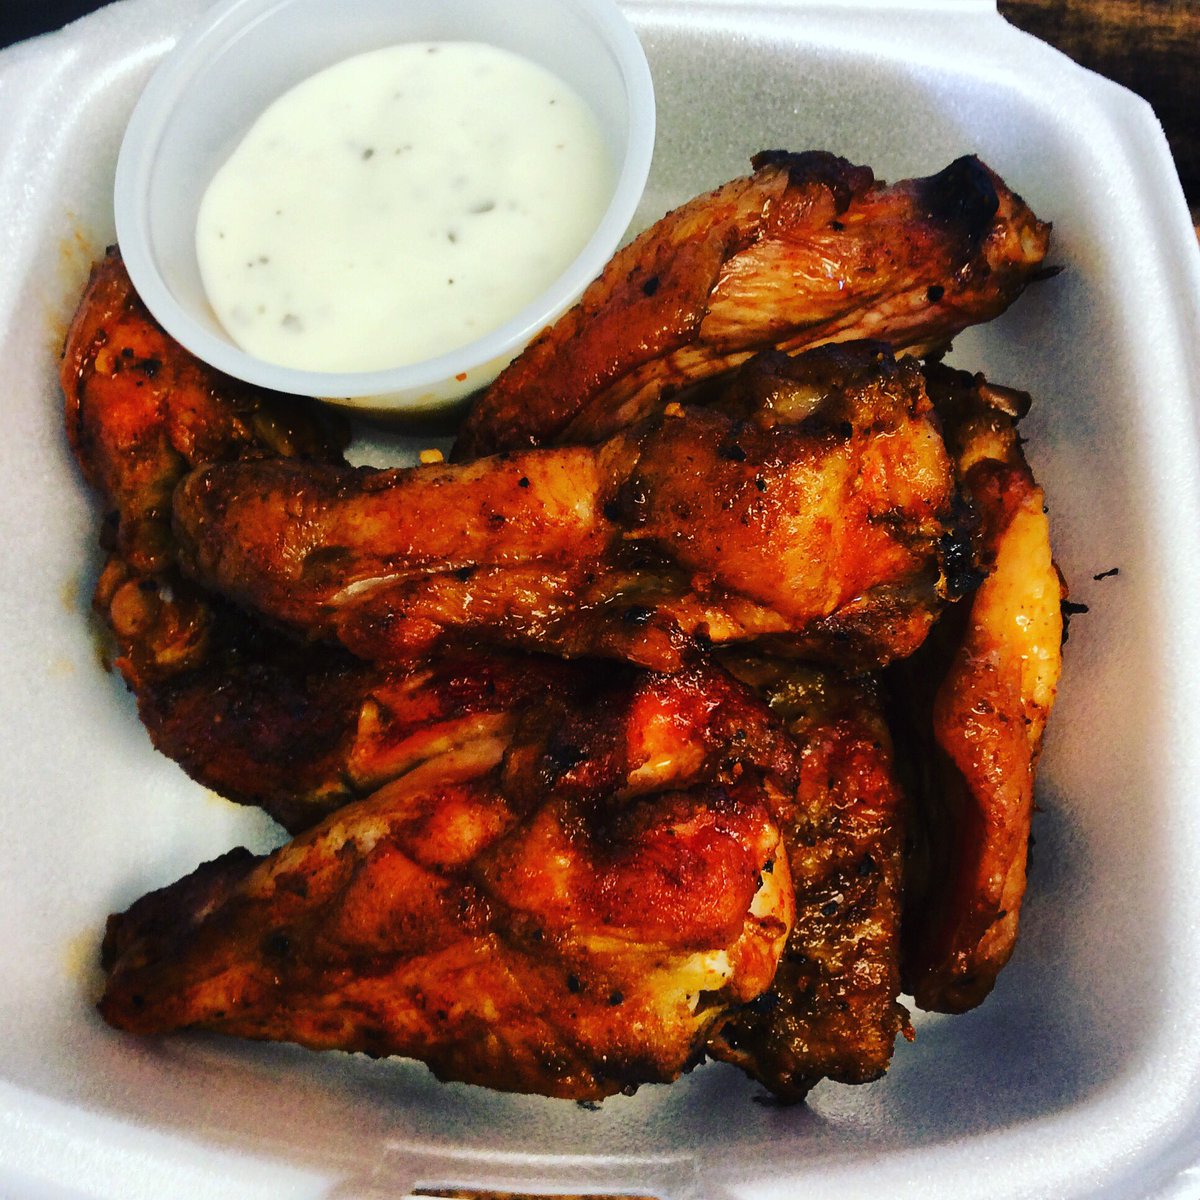 Lightly sauced #WINGS #smokedwings #craftbbq #realbbq #tennesseebbq